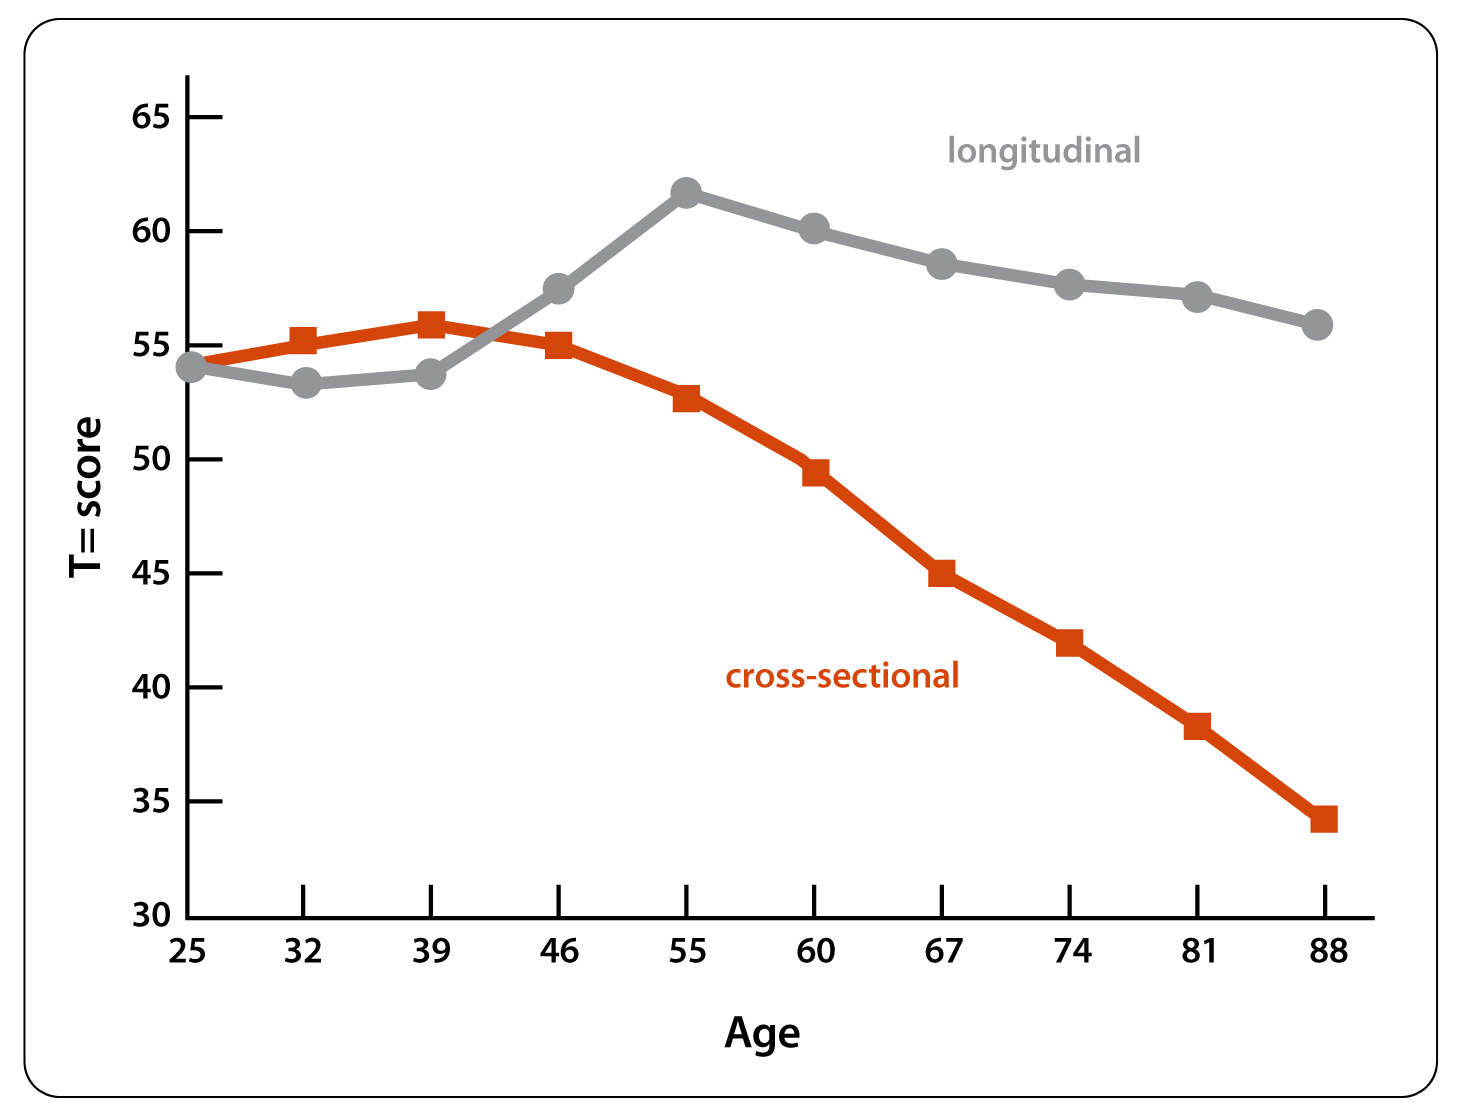 X-axis plots age, and y-axis plots intelligence test scores.  The longitudinal study line shows a slight peak on test scores around 55-60, but otherwise, line is pretty steady from age 15 to 88.  The cross-sectional study line shows a steady decline in test scores from 25 to 88 years of age.